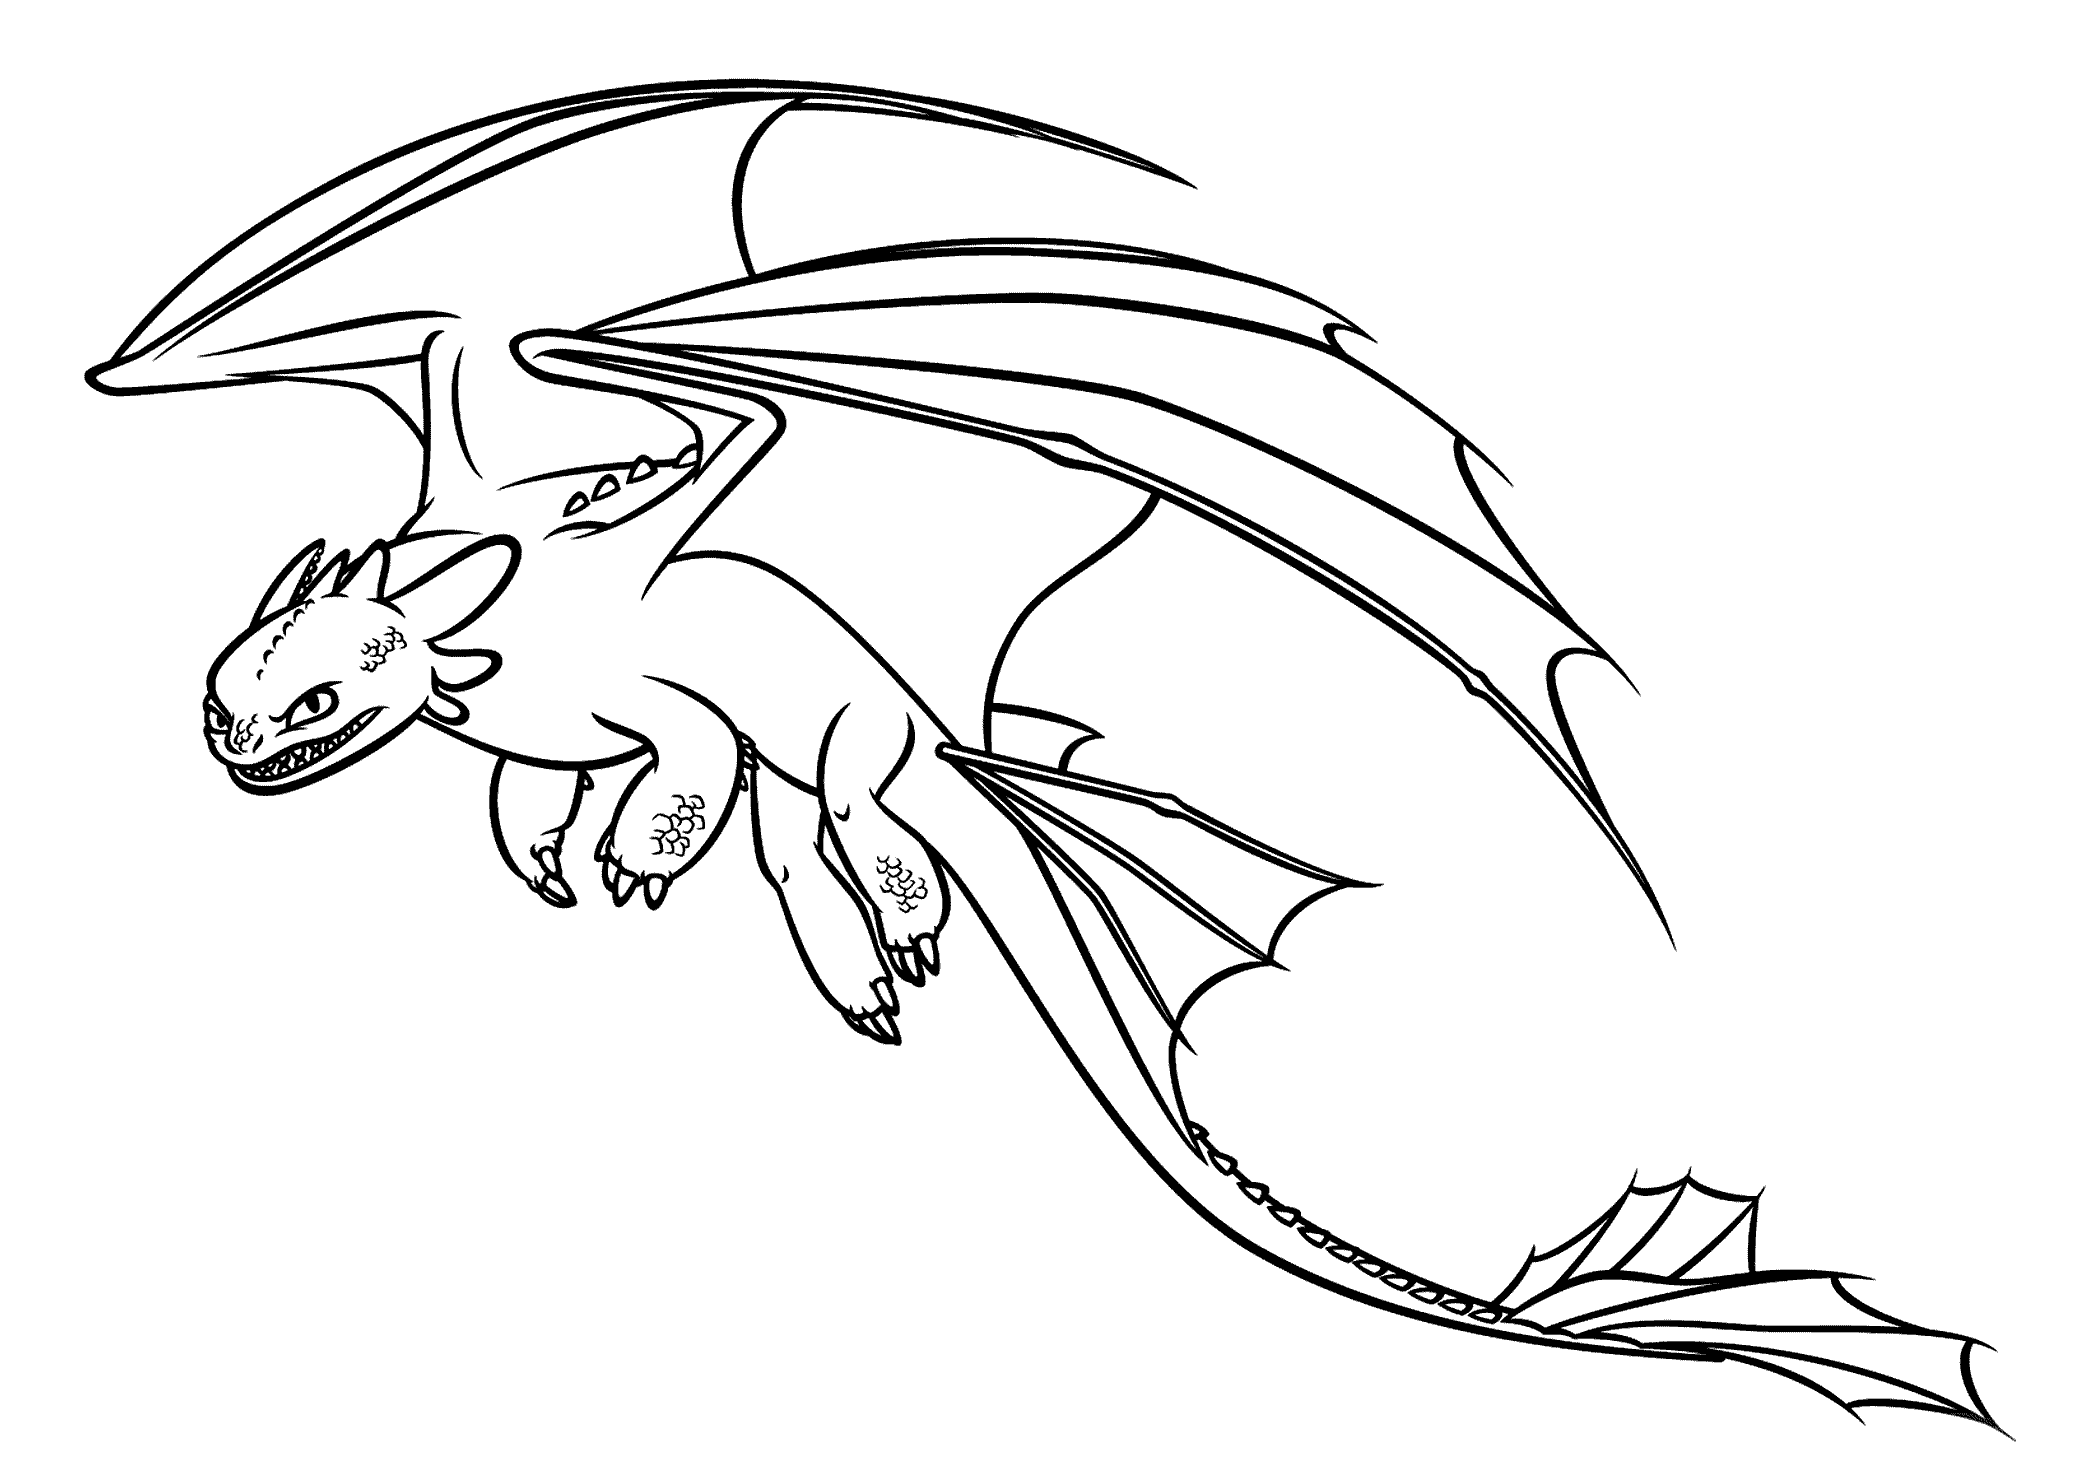 dragon coloring pictures dragon coloring pages for adults to download and print for dragon coloring pictures 